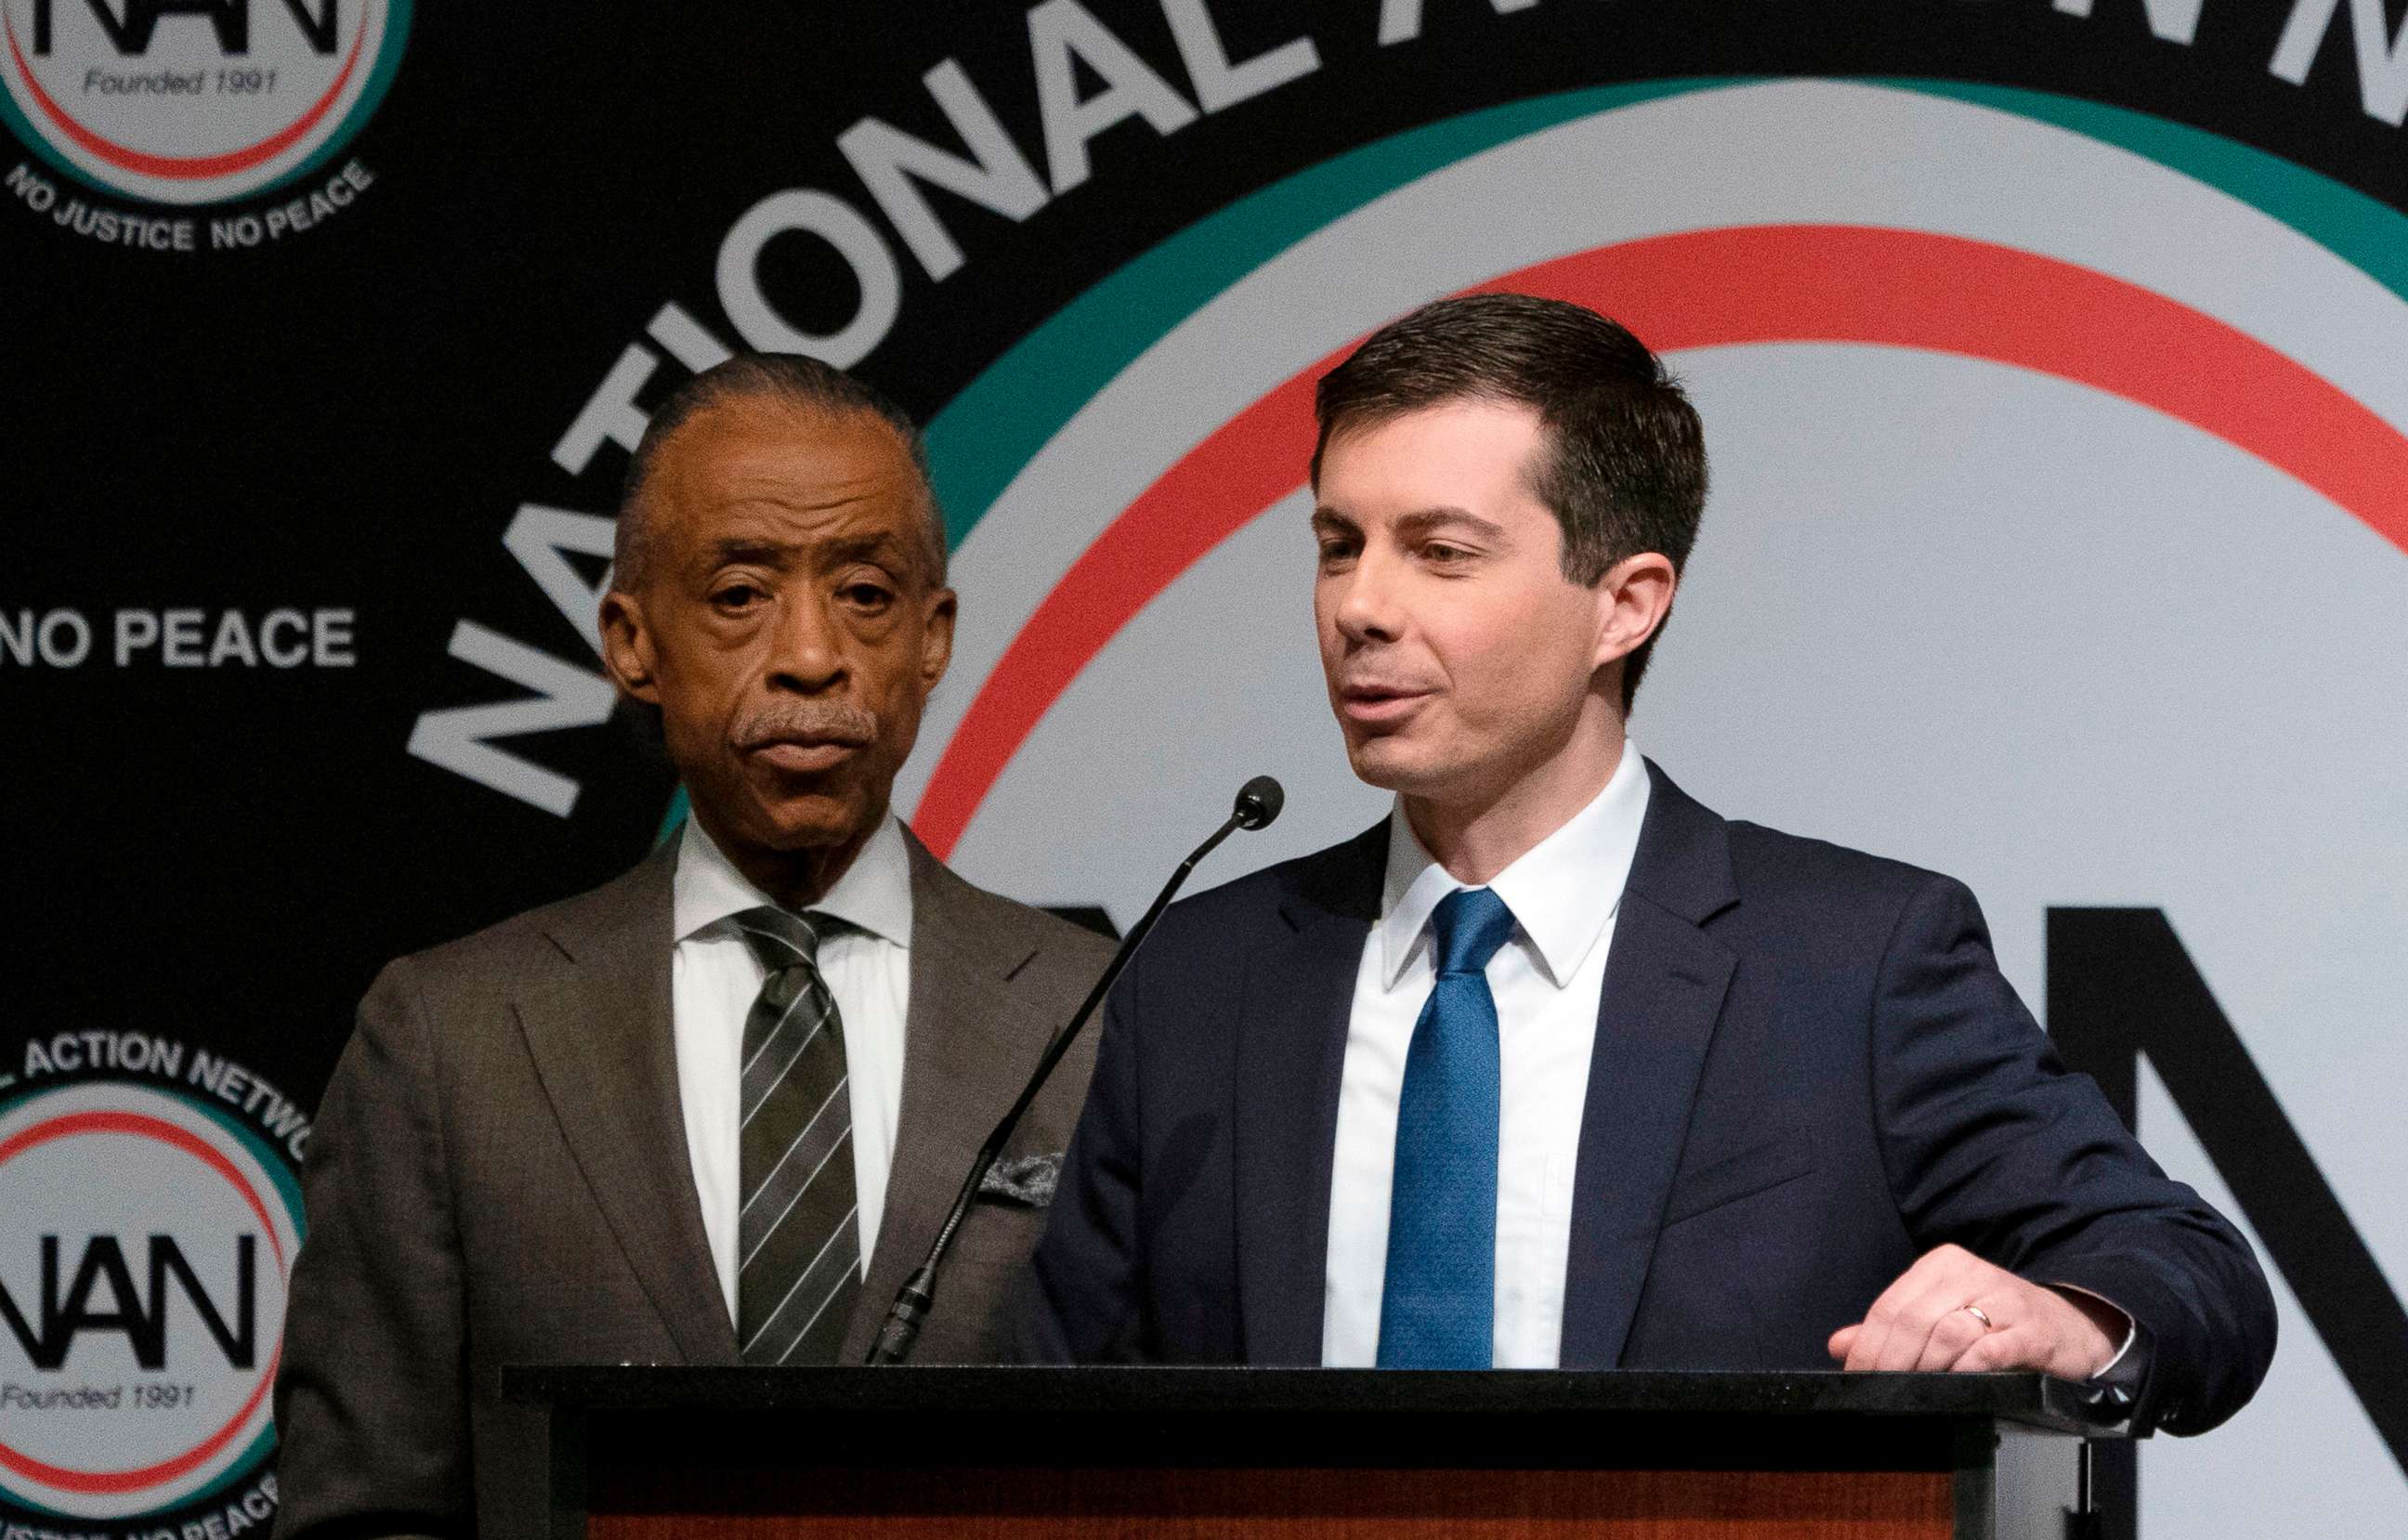 PHOTO: Democratic Presidential candidate Pete Buttigieg, with the Reverend Al Sharpton, speaks during a gathering of the National Action Network, April 4, 2019, in N.Y.